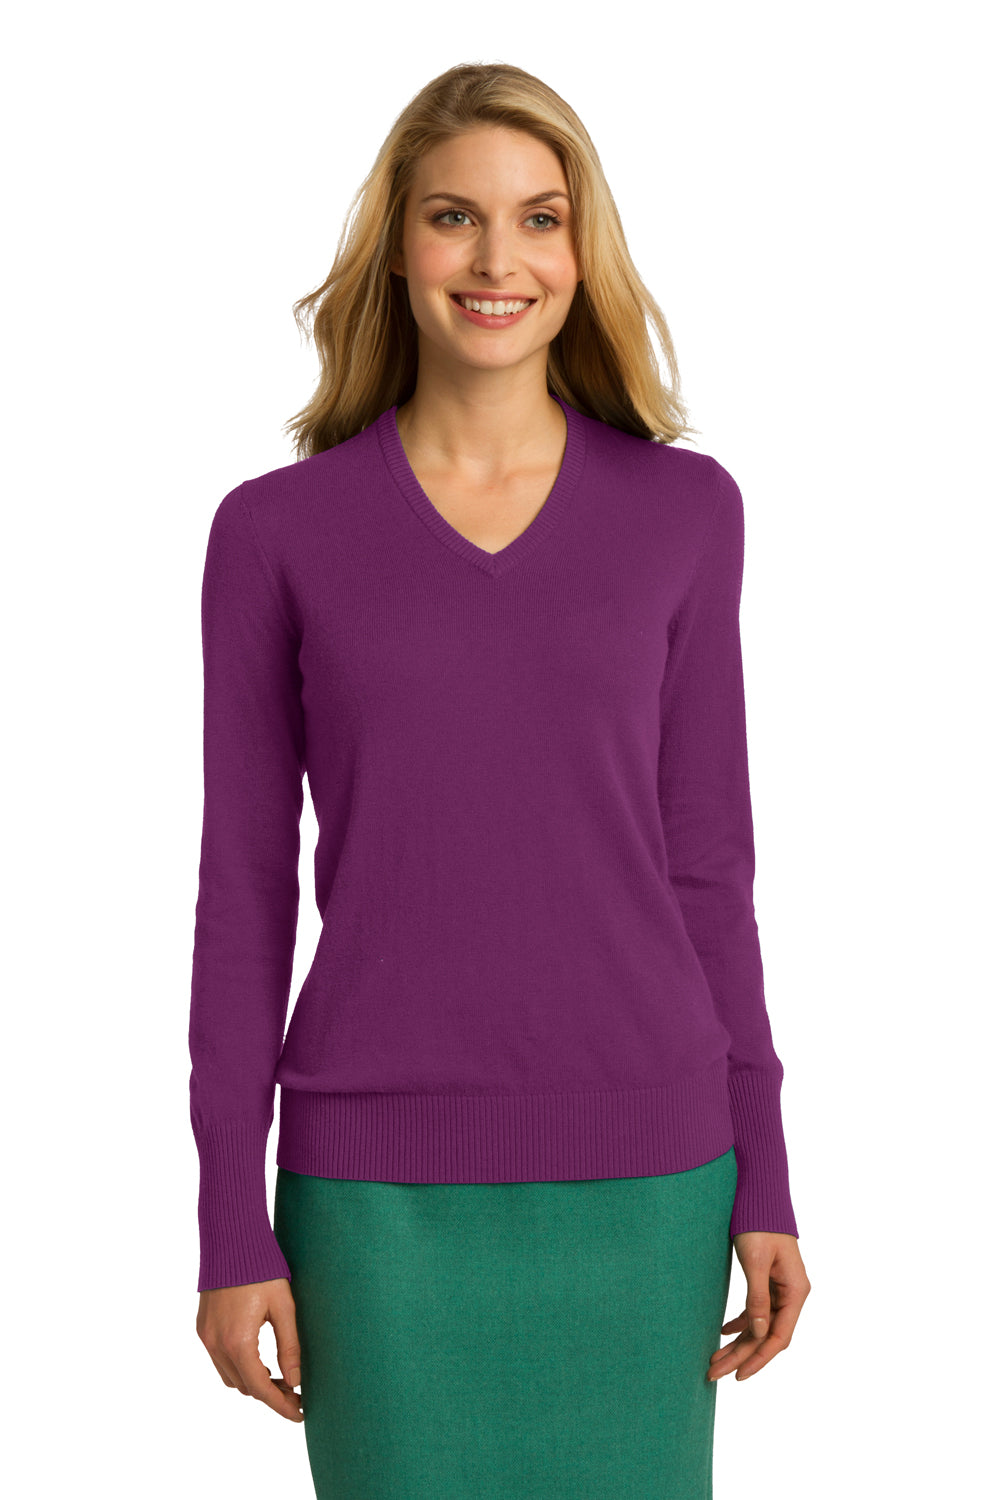 Port Authority LSW285 Womens Long Sleeve V-Neck Sweater Berry Purple Front